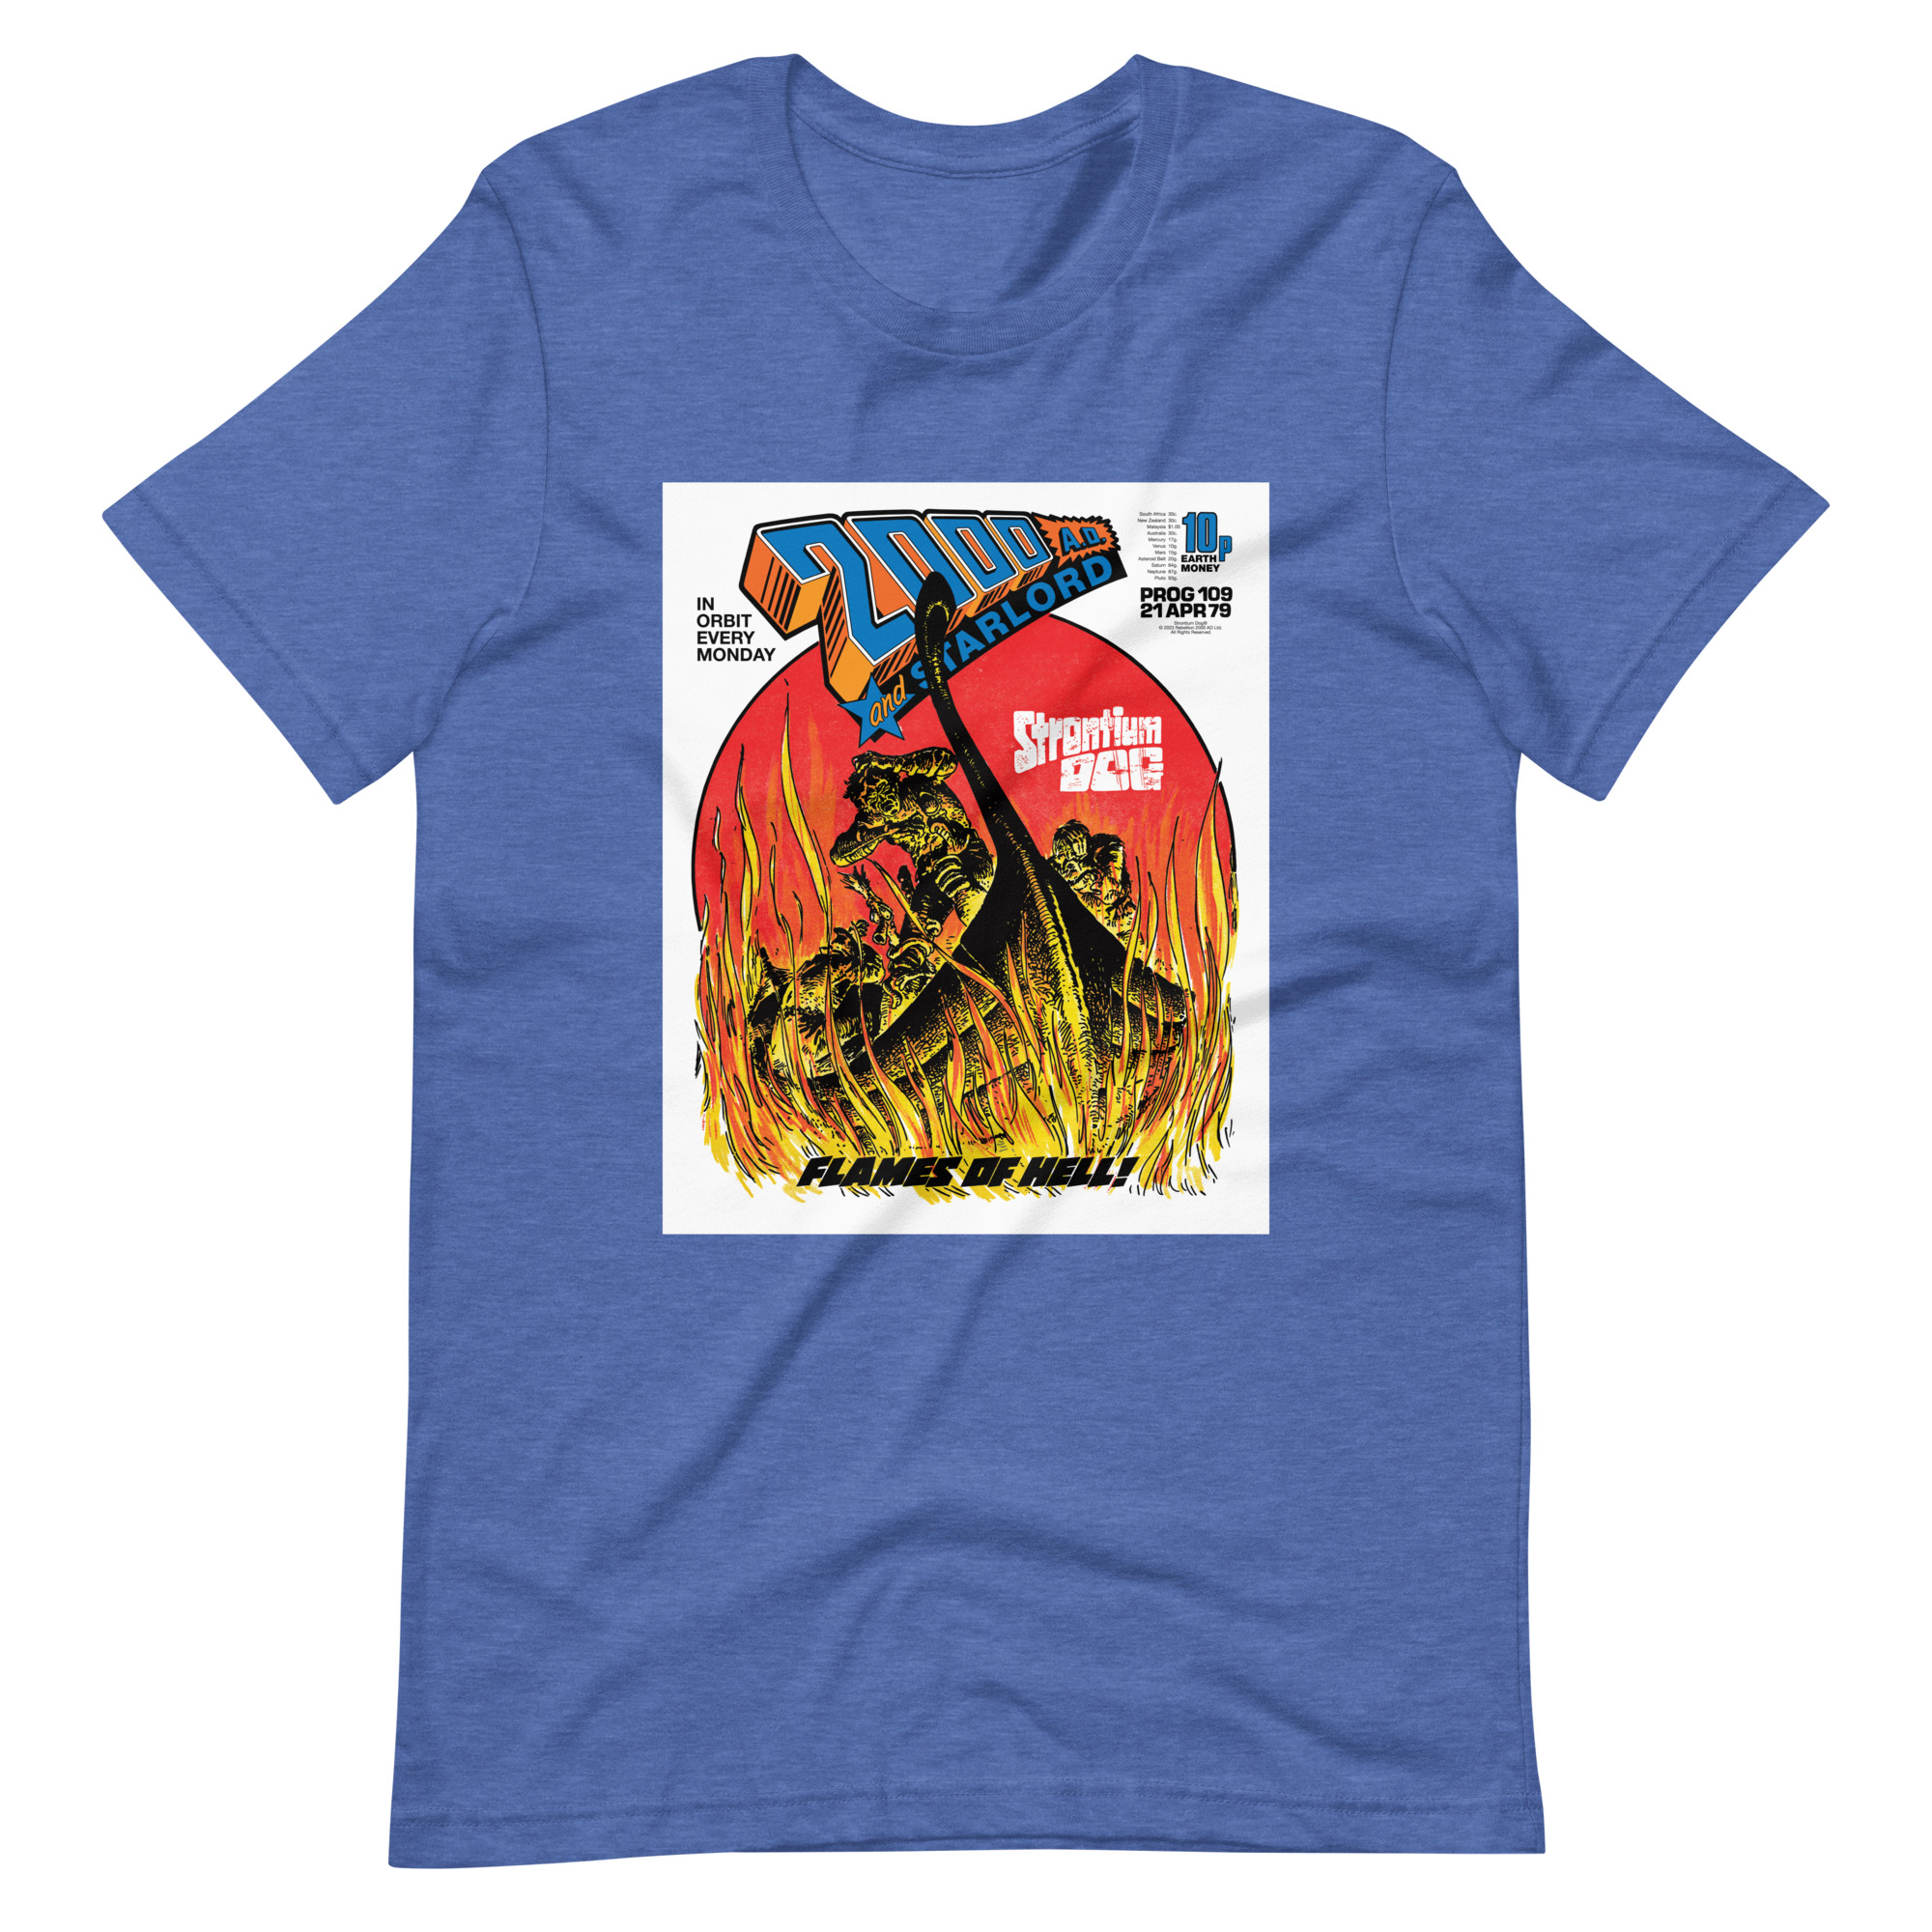 Blue Tshirt with an image on the chest. Image is cover of 2000 AD Prog 109 and shows a viking ship wreathed in flames